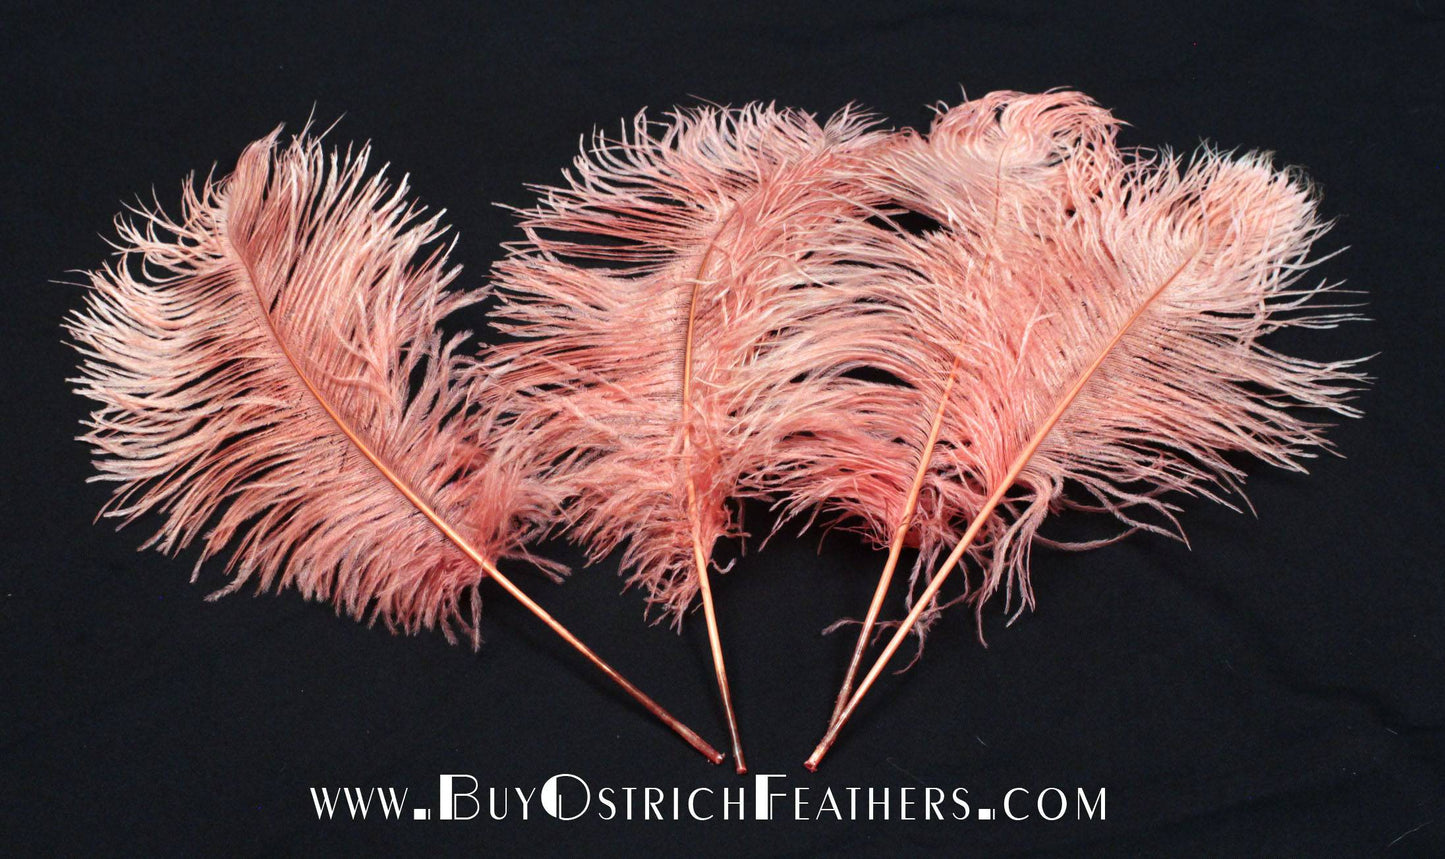 BULK 1/2lb Ostrich Feather Tail Plumes 15-20 (Apricot) for Sale Online